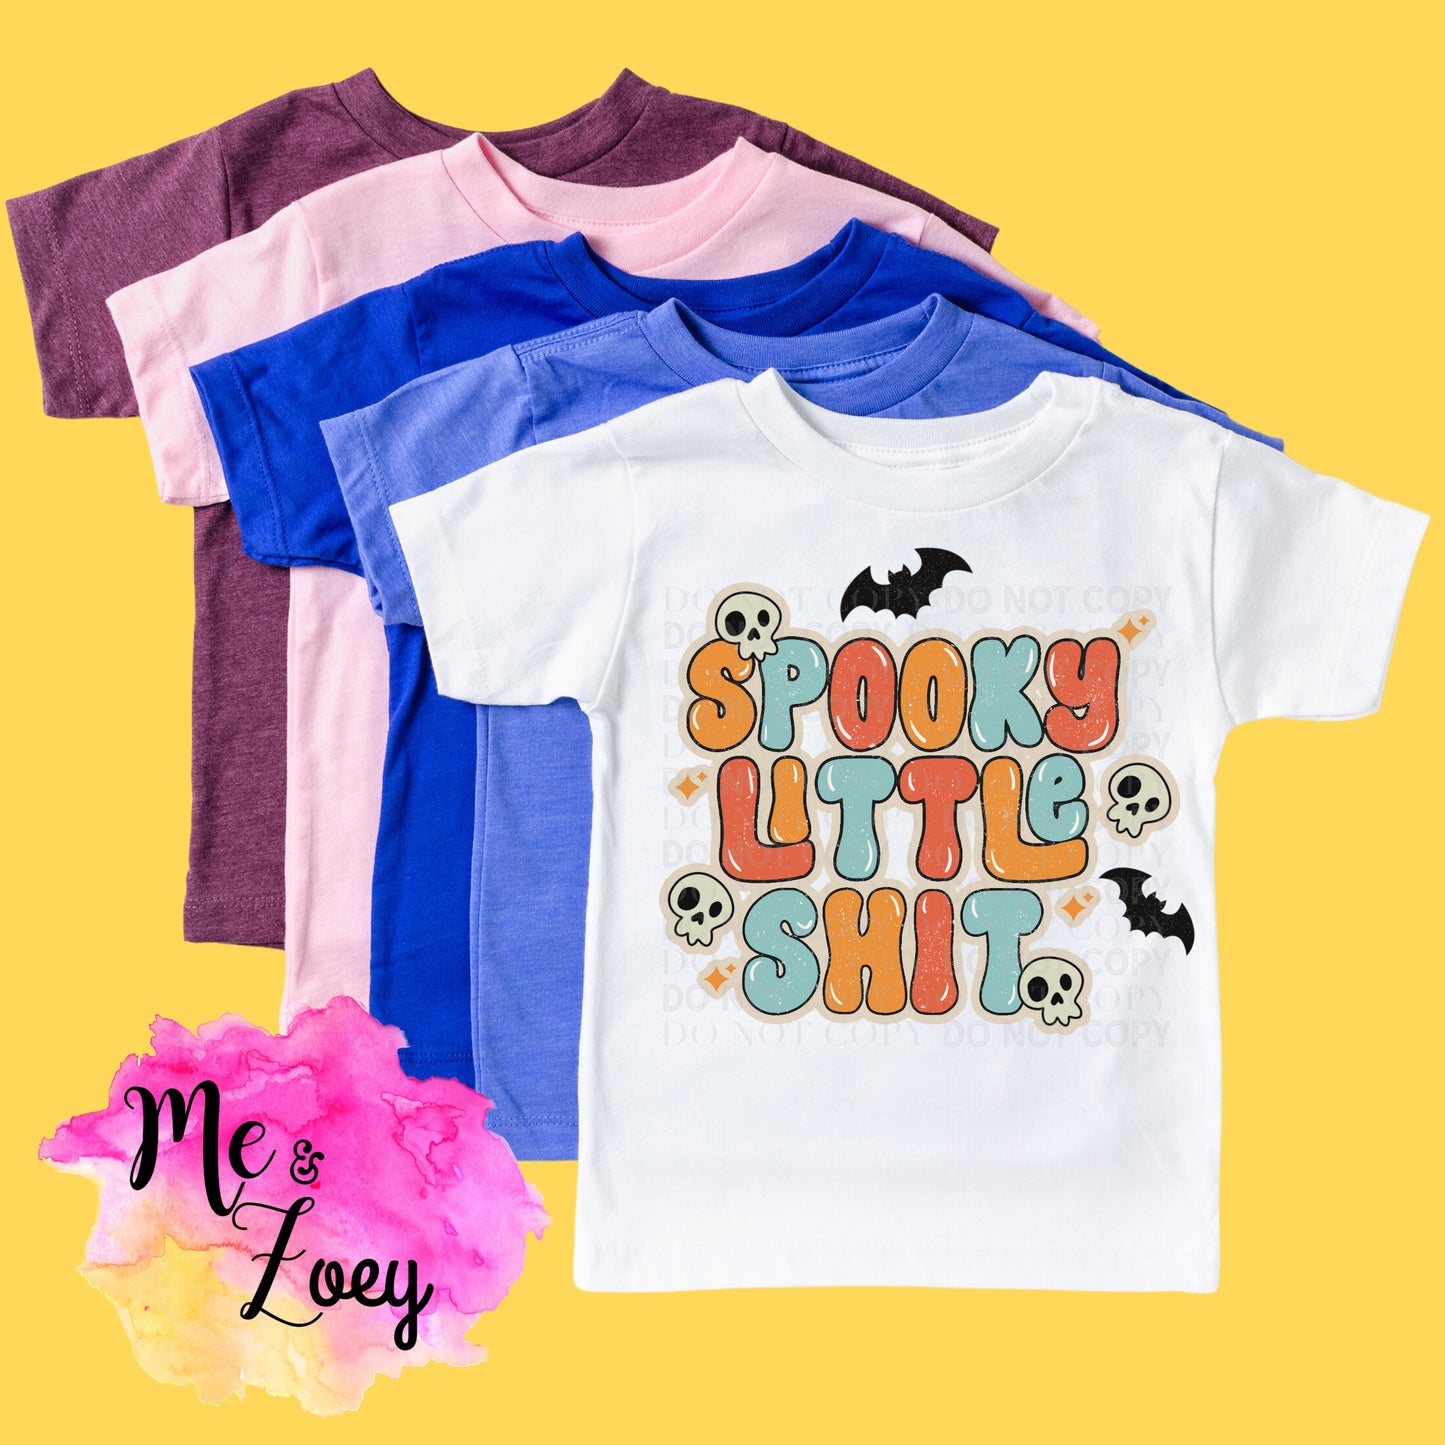 Spooky Little Shit Graphic Tee - MeAndZoey